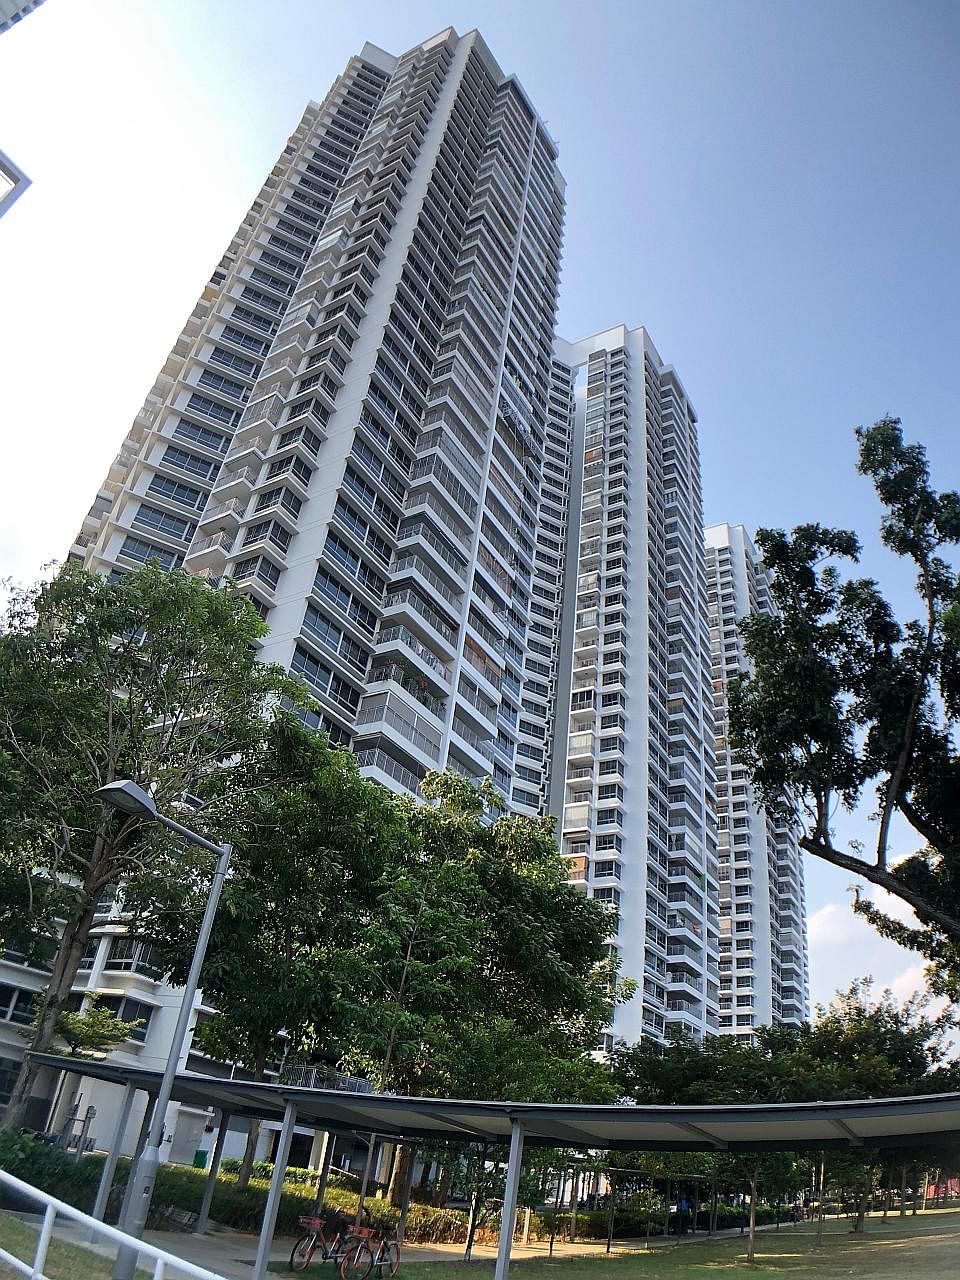 The City View @ Boon Keng unit sold for $5,000 more than the previous record for a HDB resale, set by a five-room flat in Tiong Bahru, in April. Five of the nine flats sold there this year went for over a million dollars.